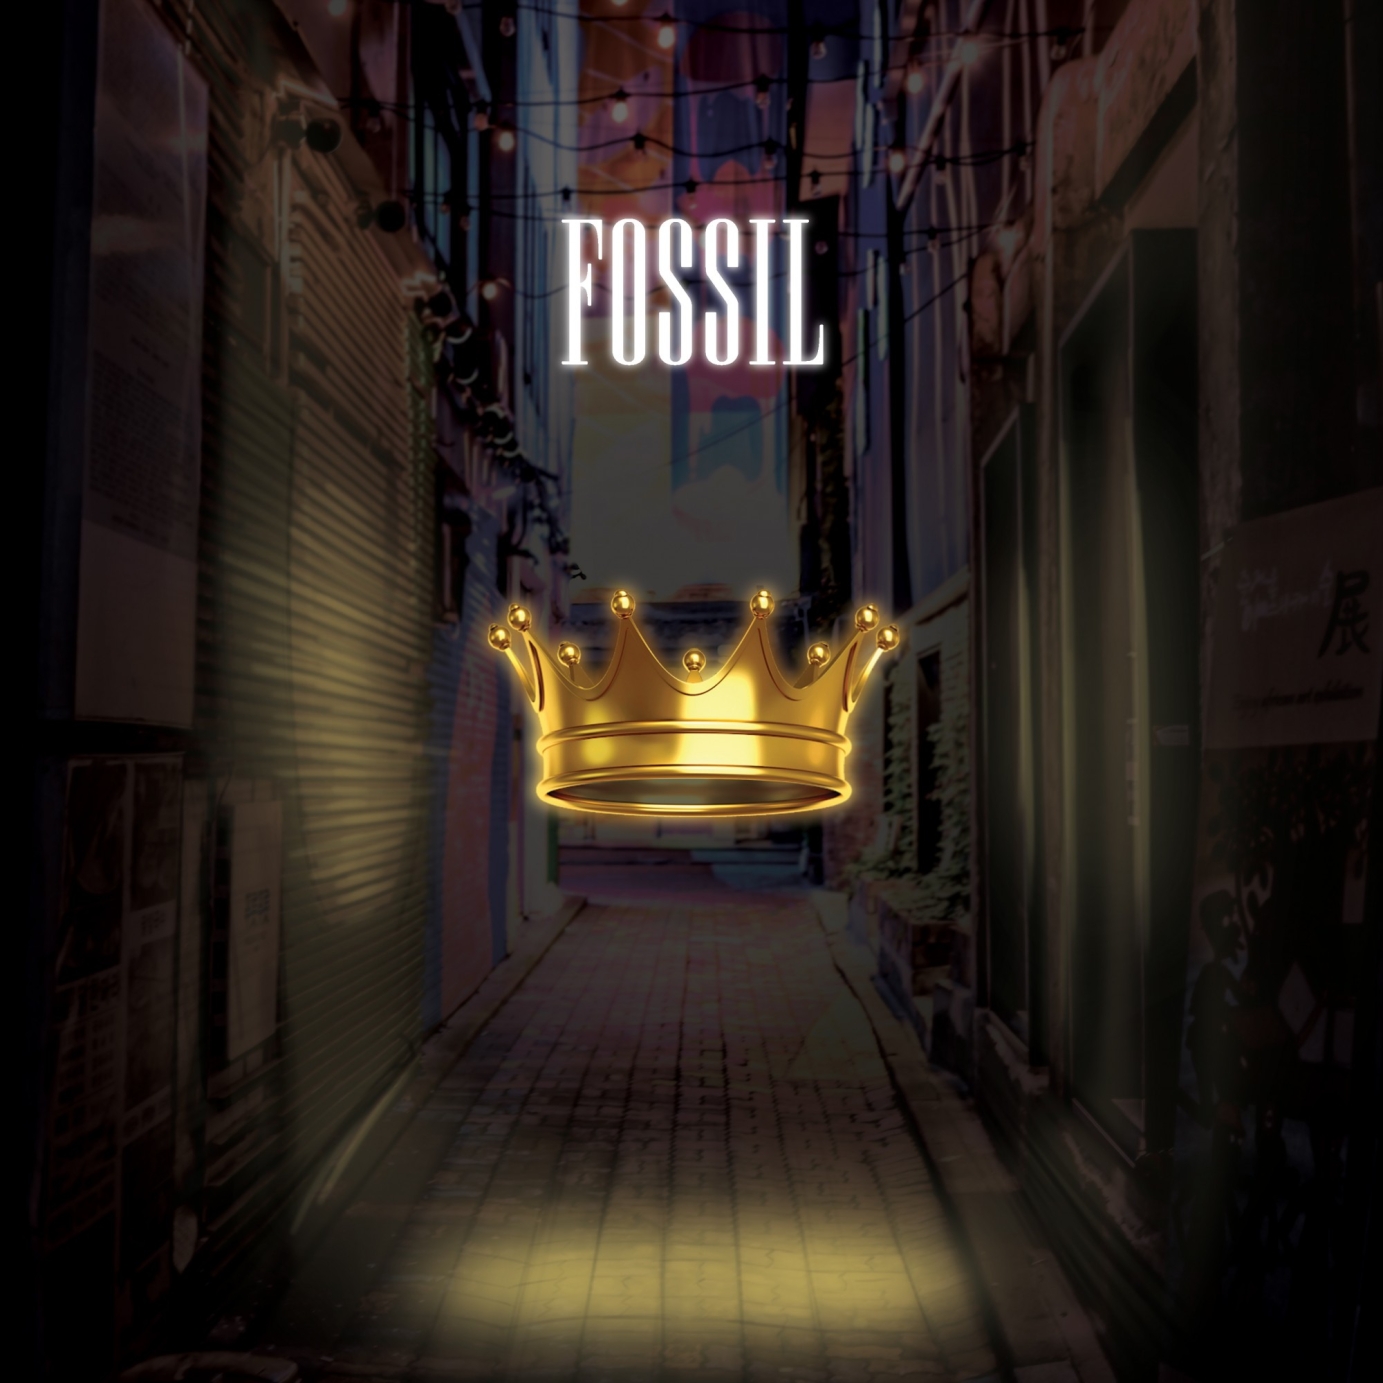 Fossil - Creative direction, Album Artwork, Poster and Merchandise designs